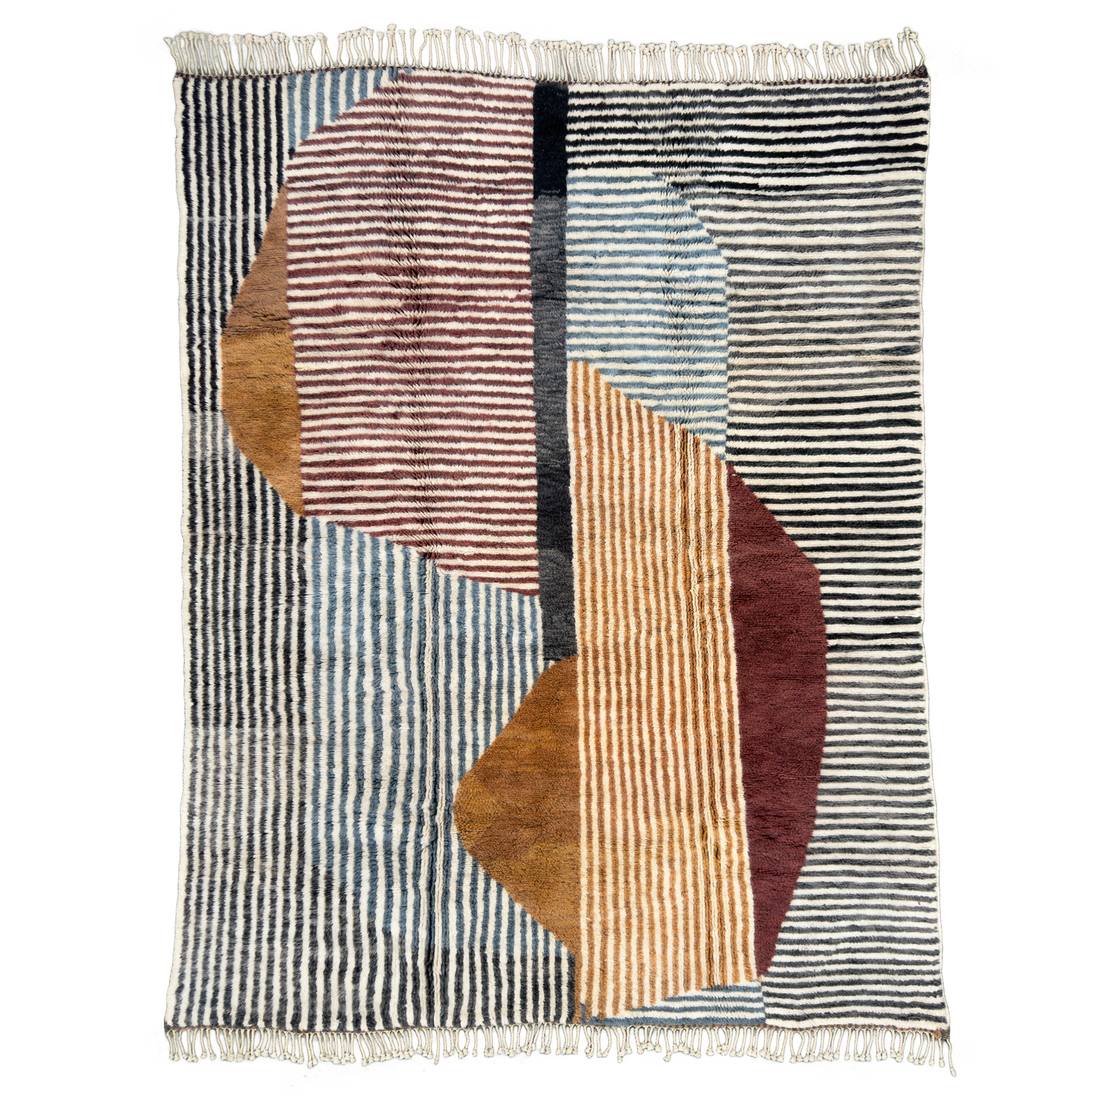  Elevate your space with the Modern Mrirt Moroccan Wool Rug. Featuring a contemporary design of solid color lines and abstract half circles in Blue, Black, Deep Brown, Maroon, and Cream, this handcrafted rug exudes luxury. Perfect for modern and eclectic styles. Shop now for an ultra-luxe addition to your home.